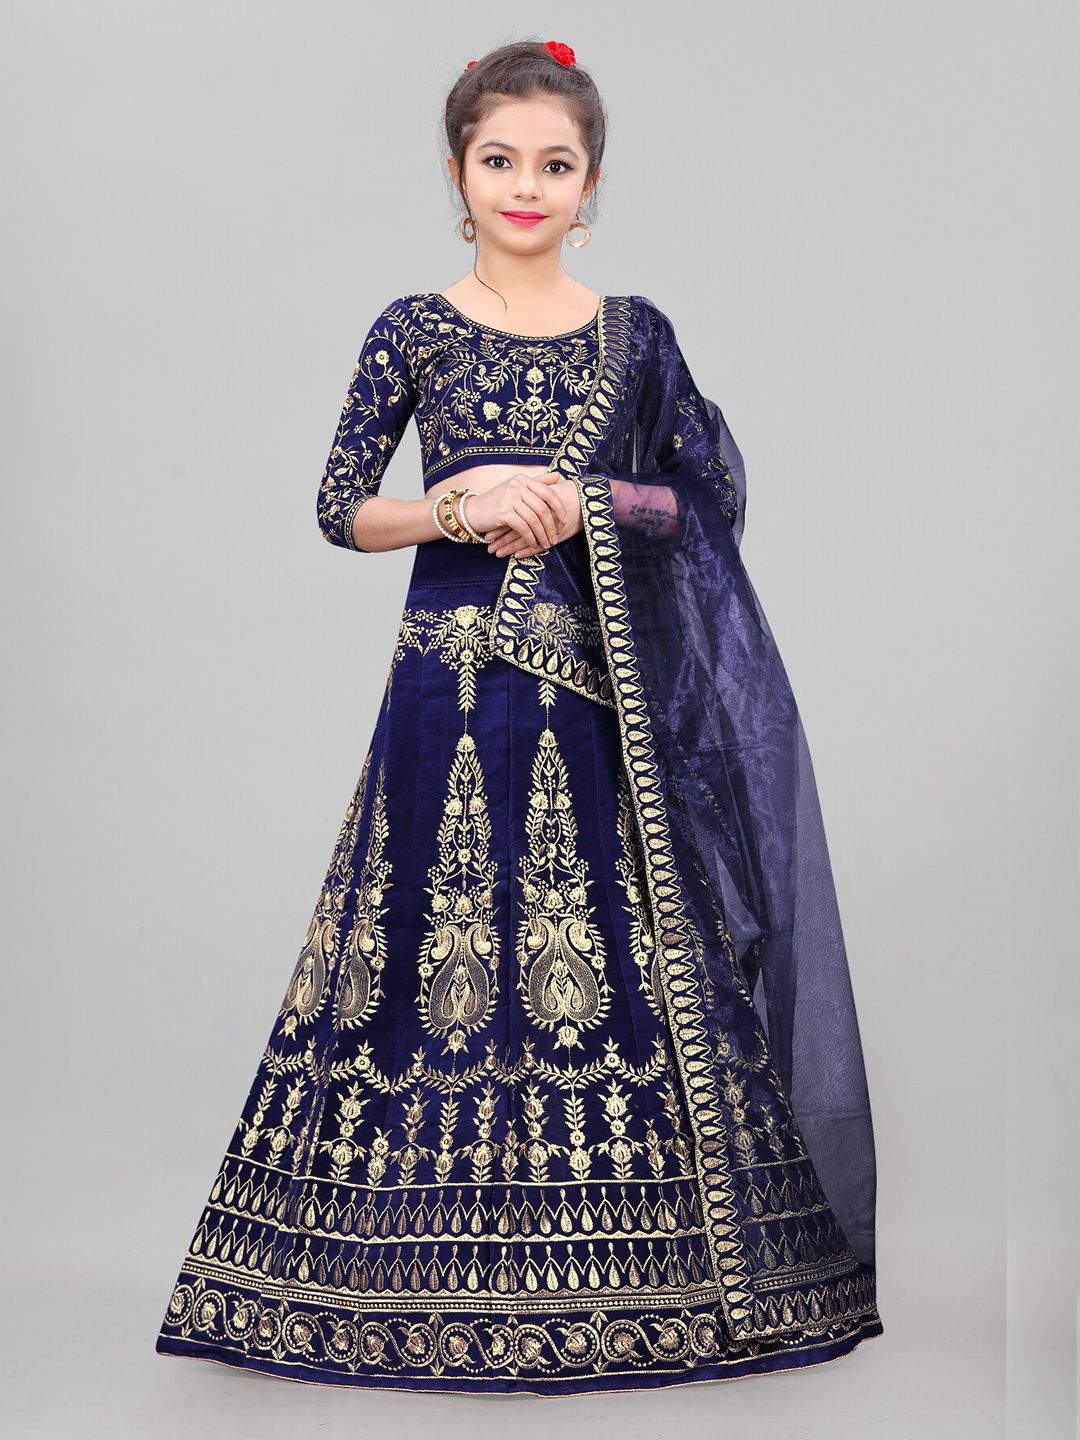 BAESD Girls Blue Embroidered Thread Work Semi-Stitched Lehenga & Unstitched Blouse With Dupatta Price in India